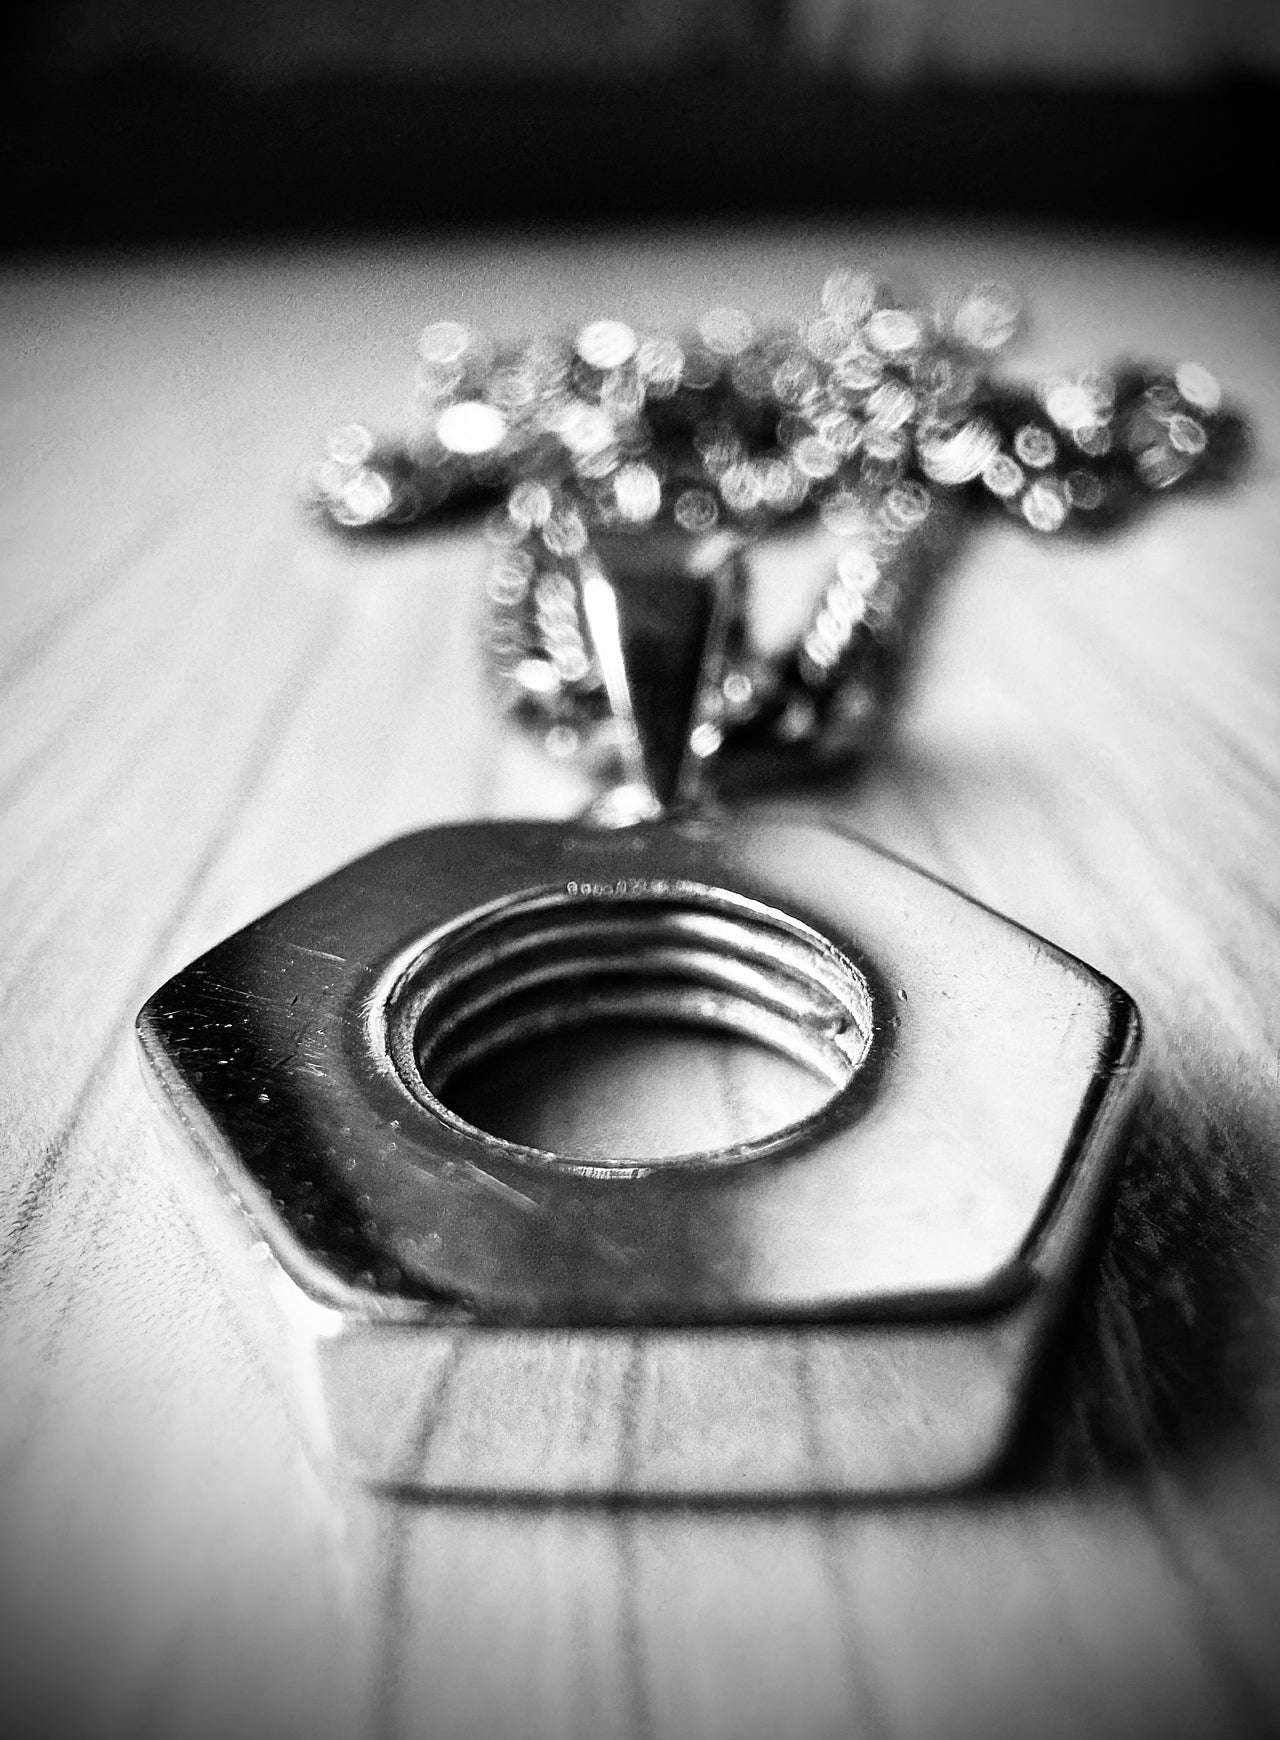 40% off ADD ON - HEX NUT PENDANT (SILVER)